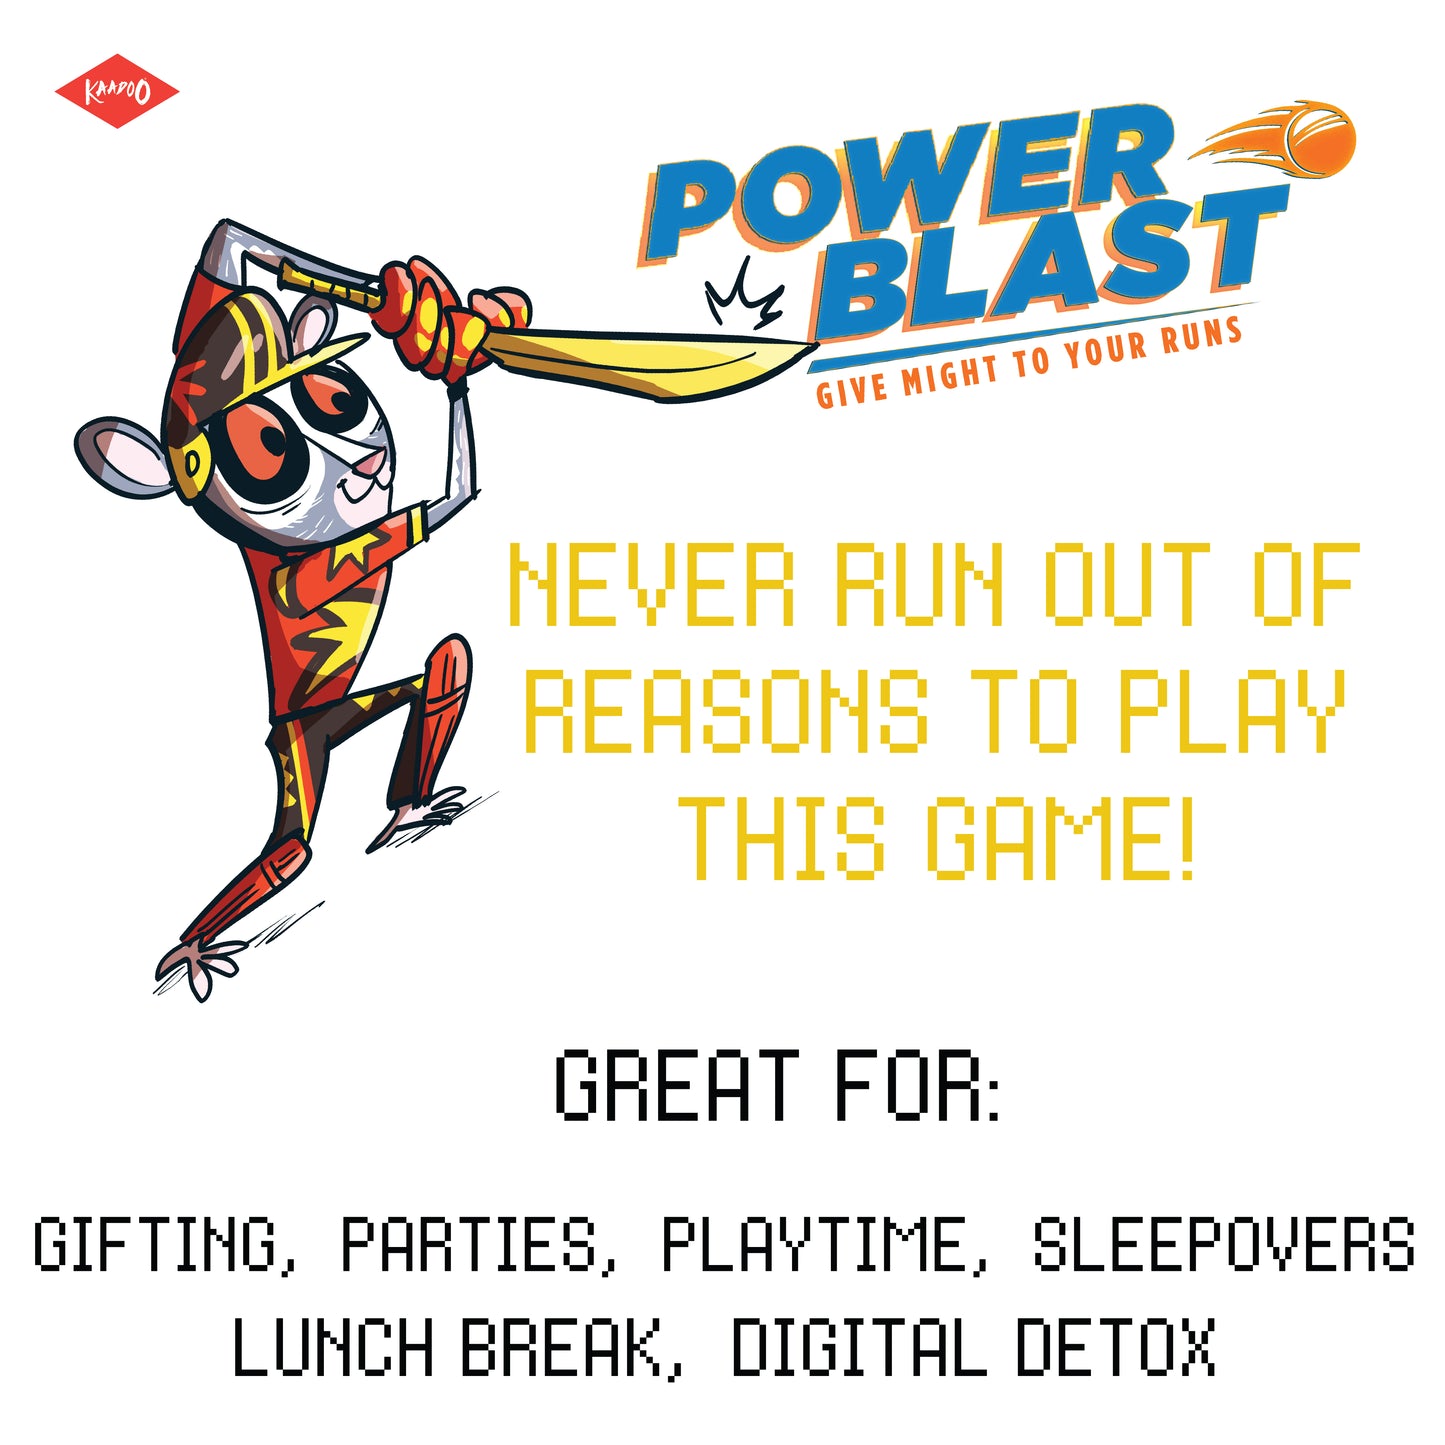 POWER BLAST Card Game – Give Might to Your Runs - Mystery Goodies Included